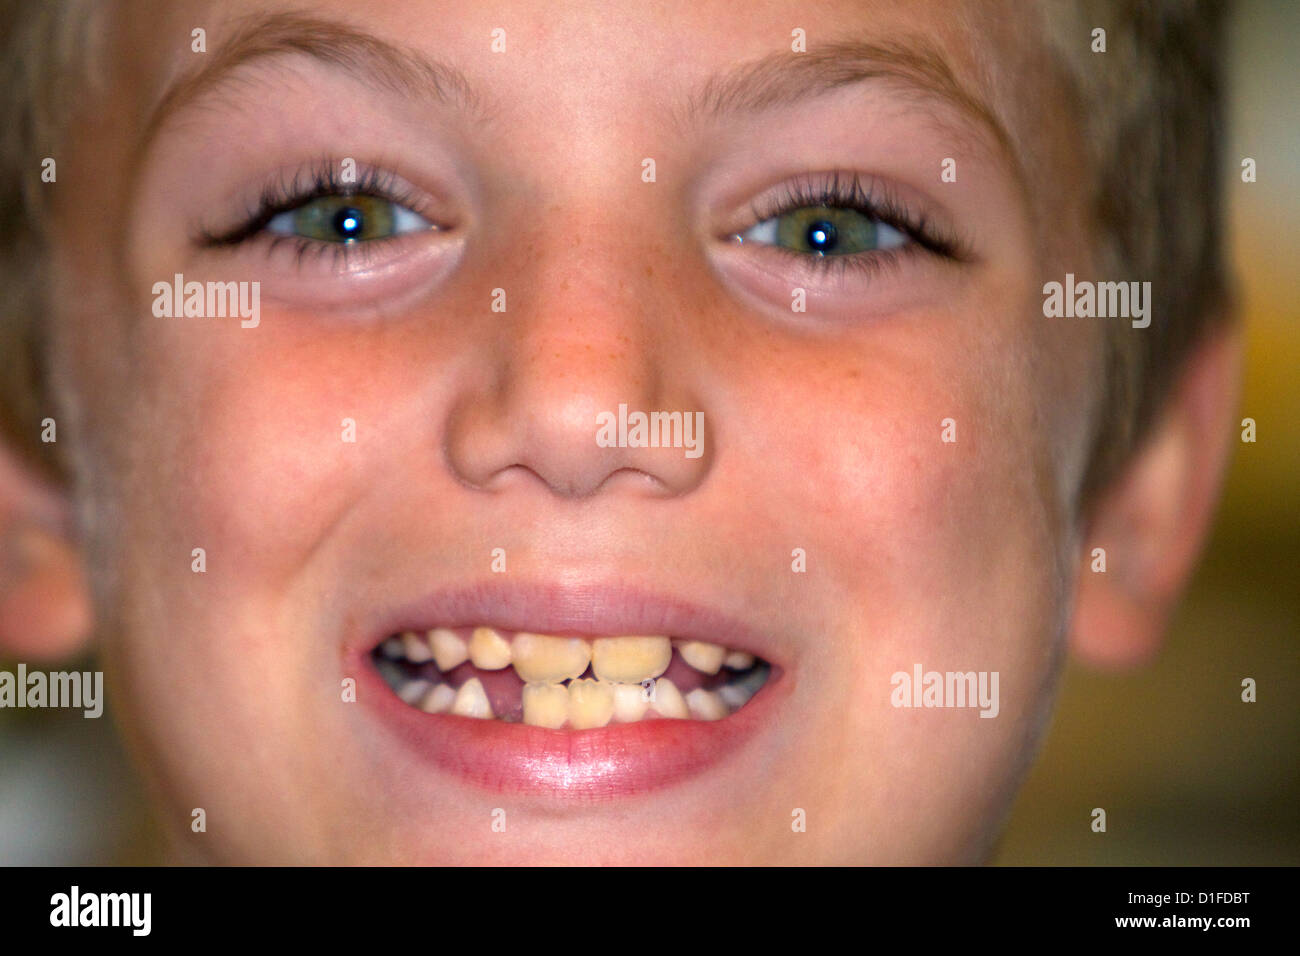 Seven year old boy with missing tooth. Stock Photo